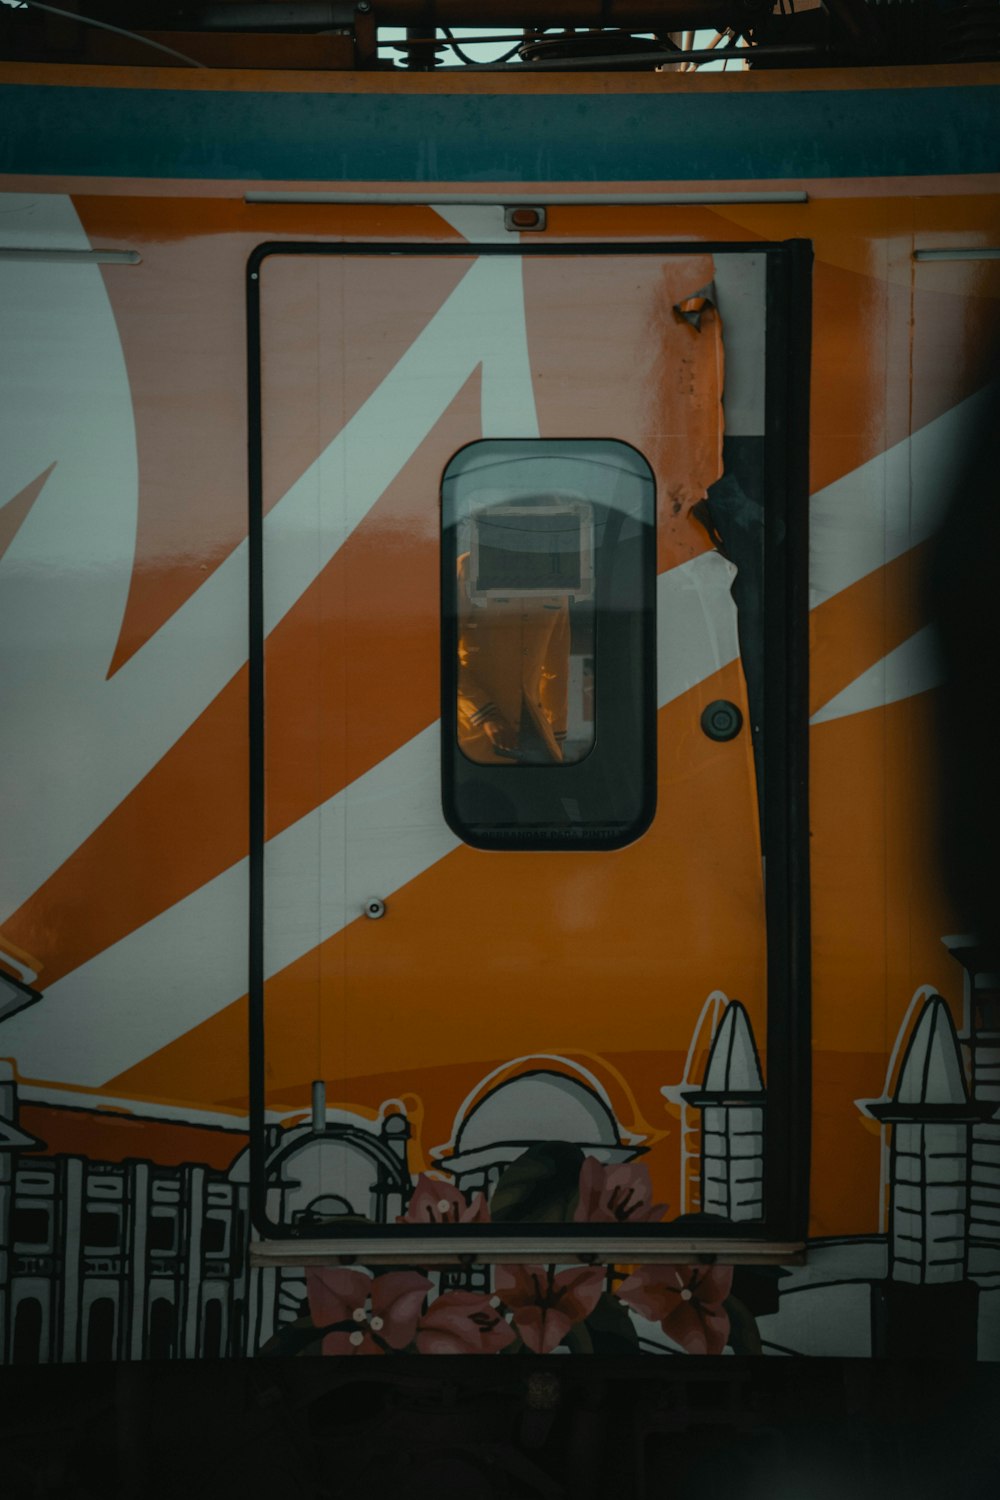 a close up of a train with graffiti on it